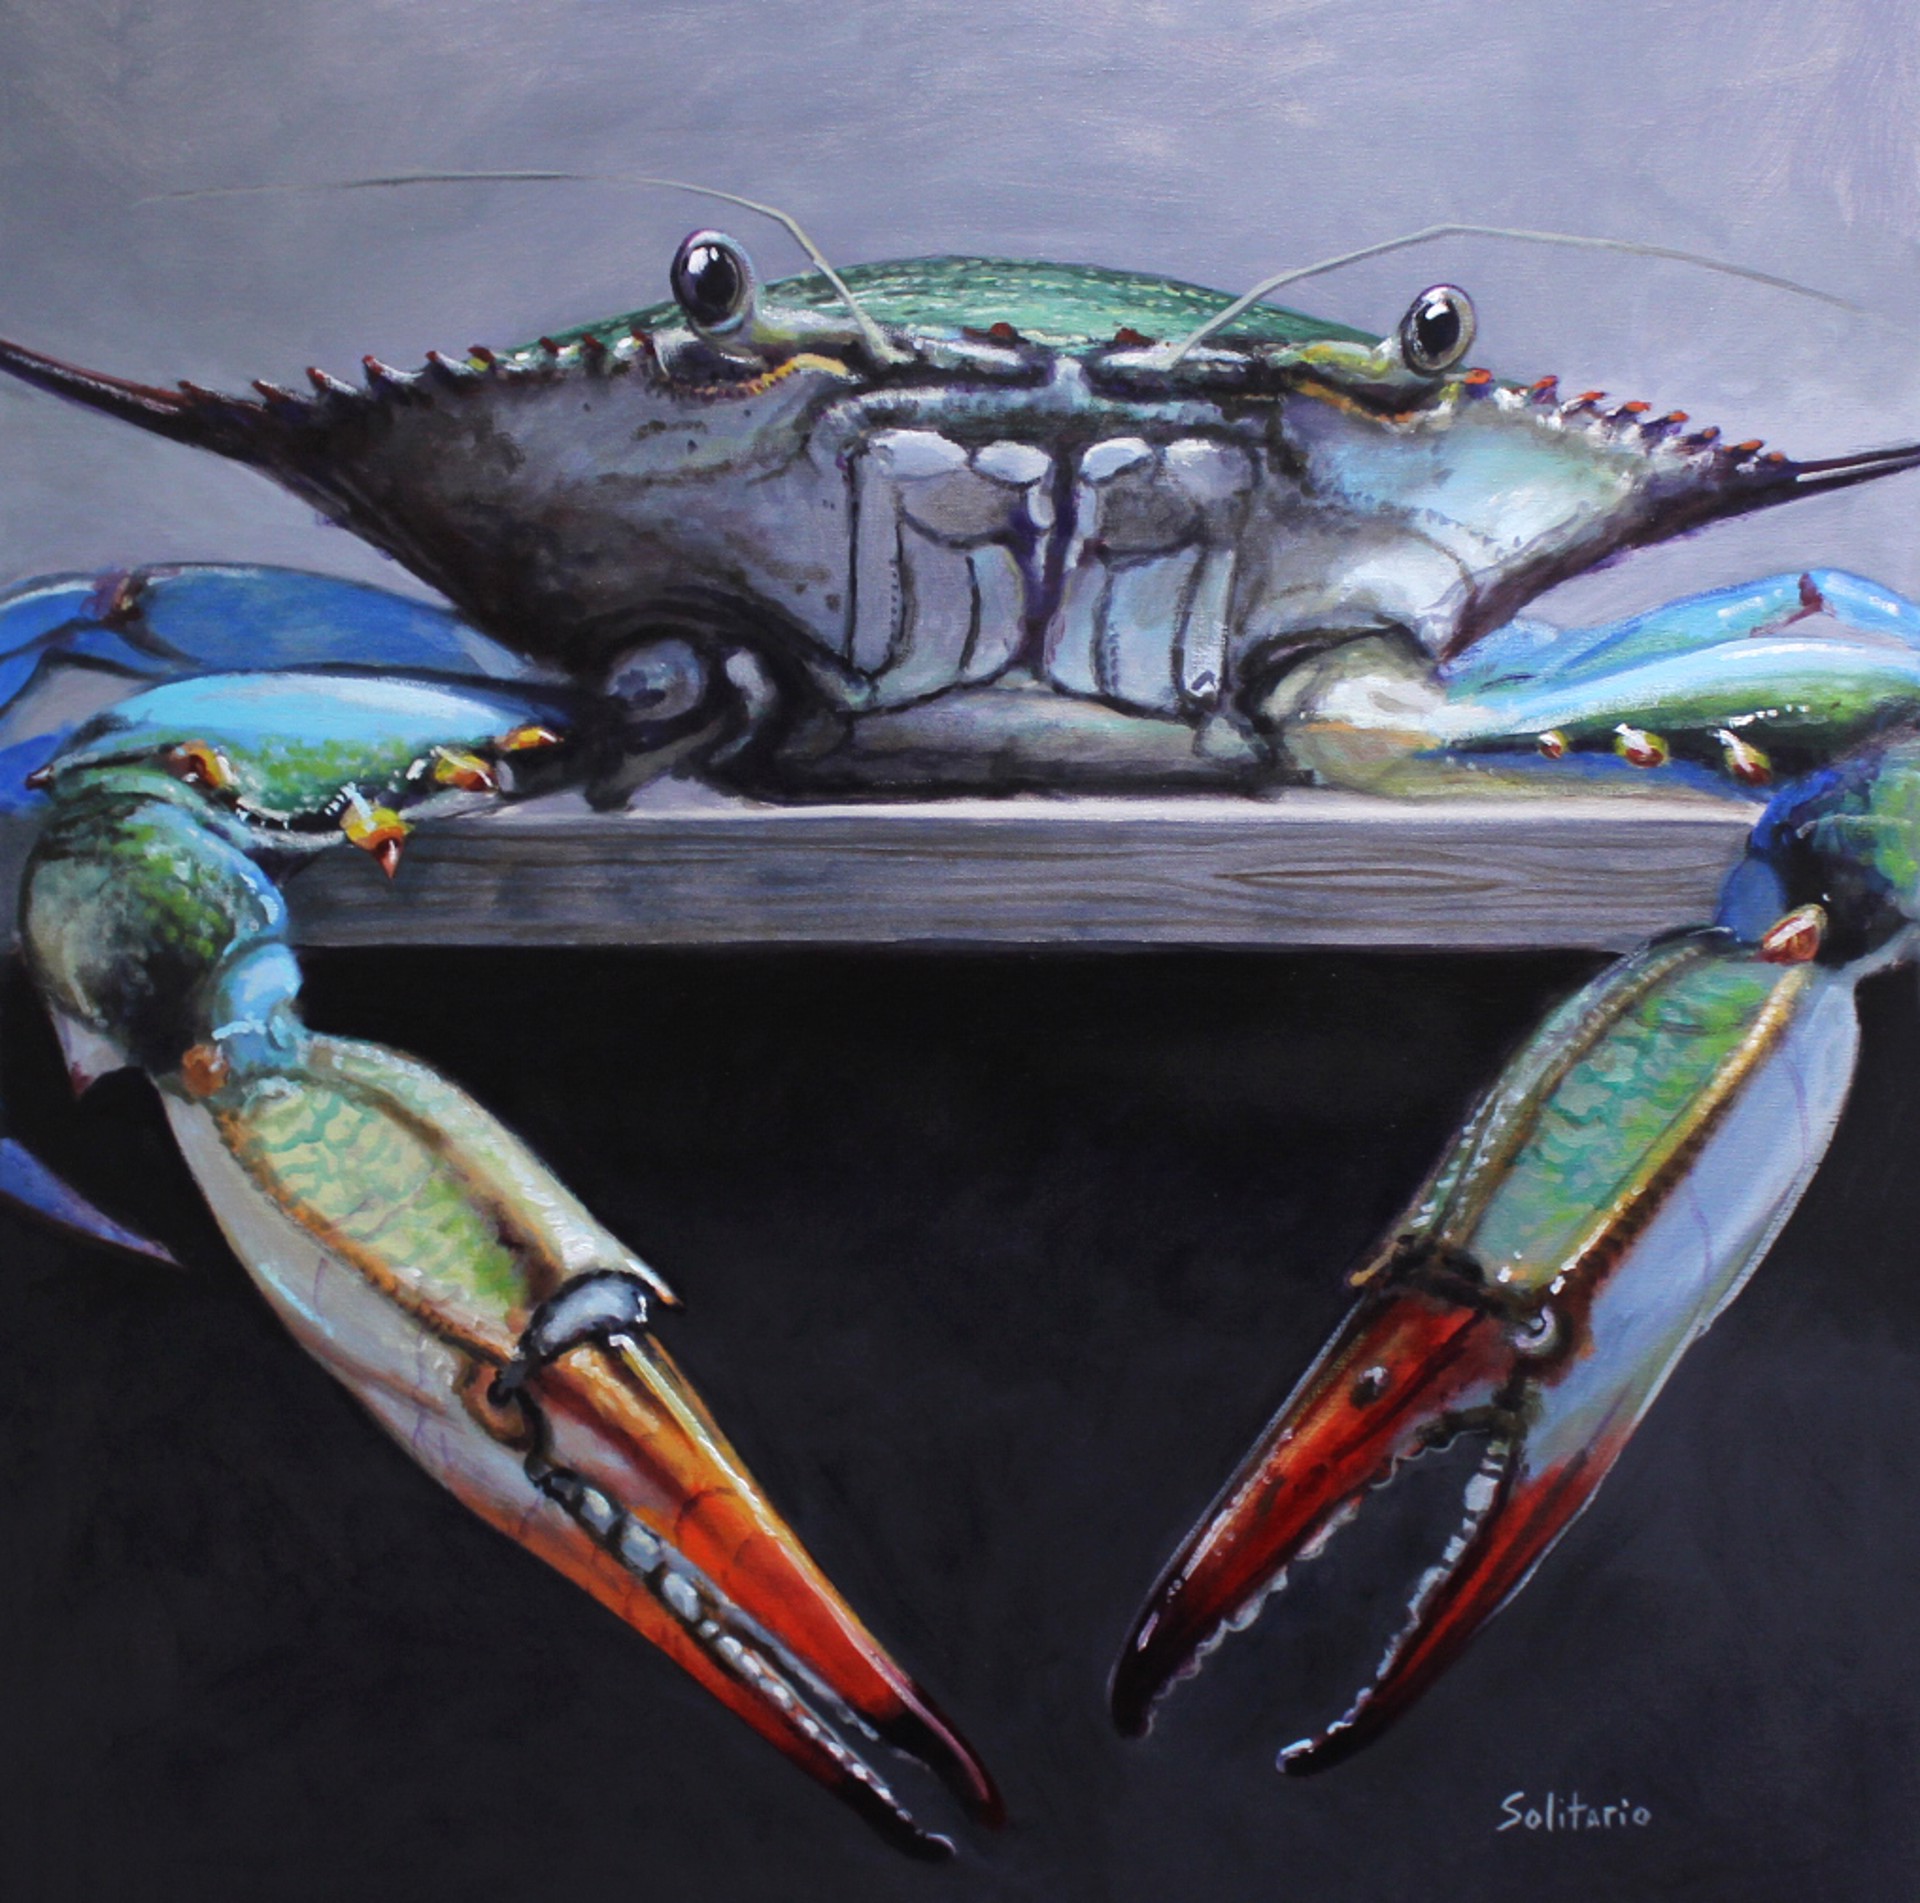 Blue Crab Staring Contest by Billy Solitario